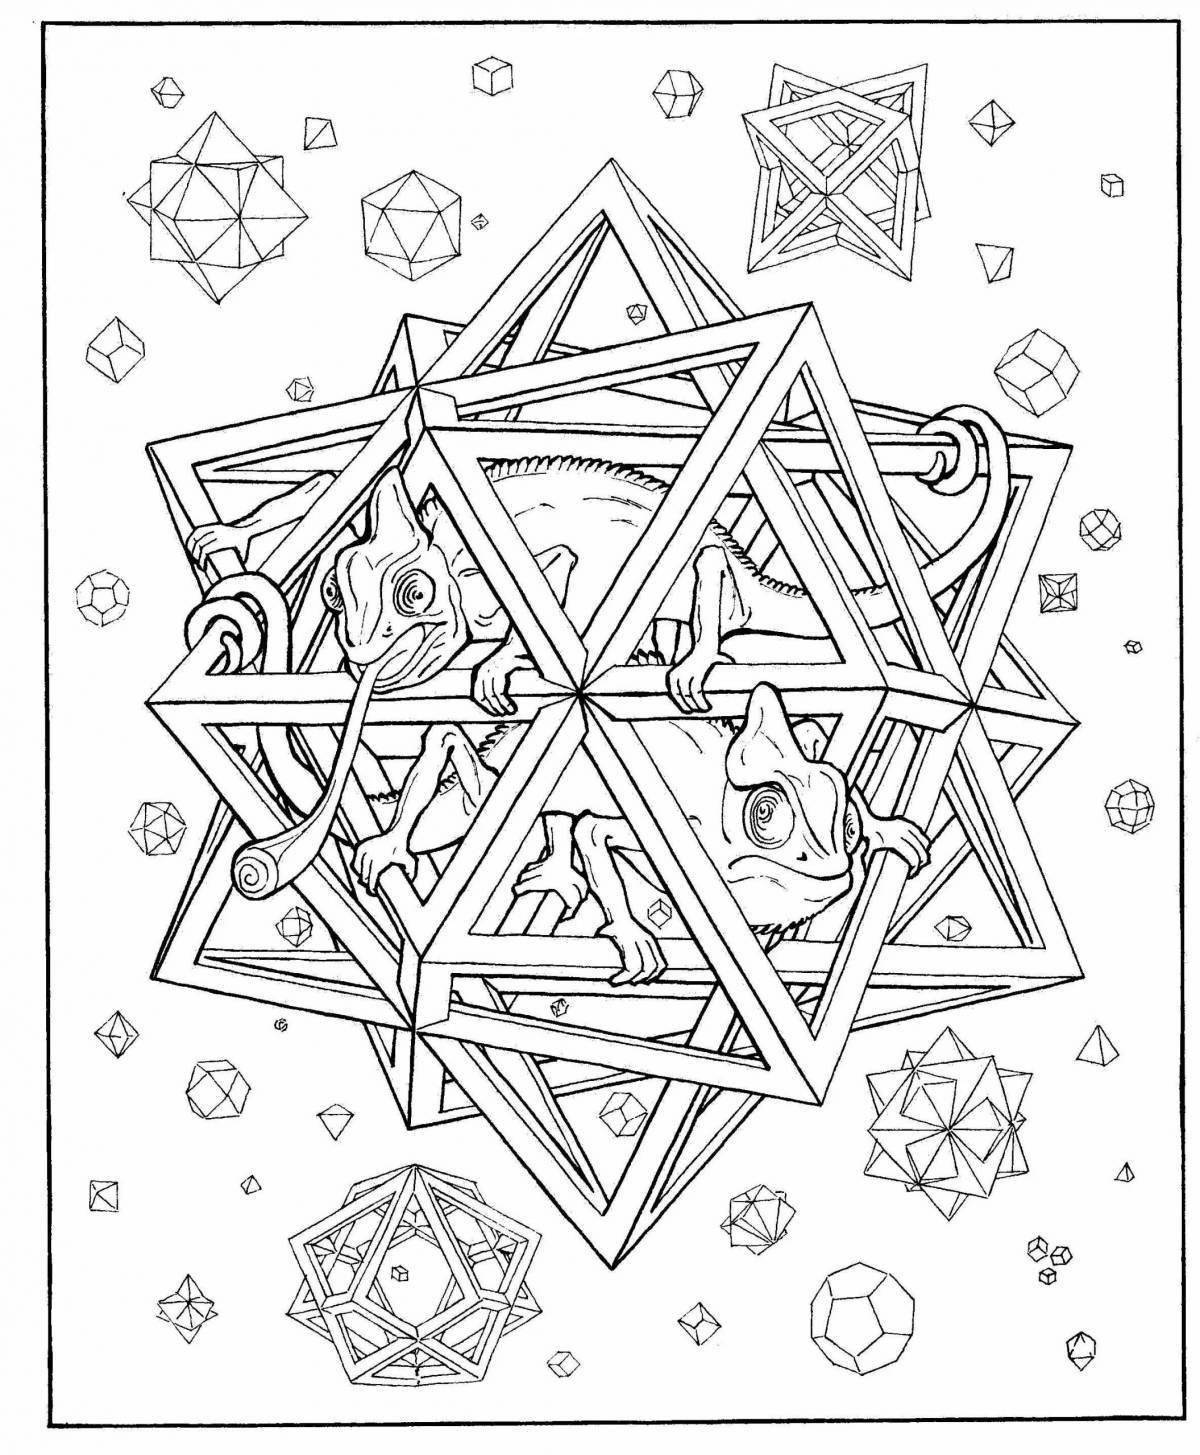 Colorful geometry coloring page